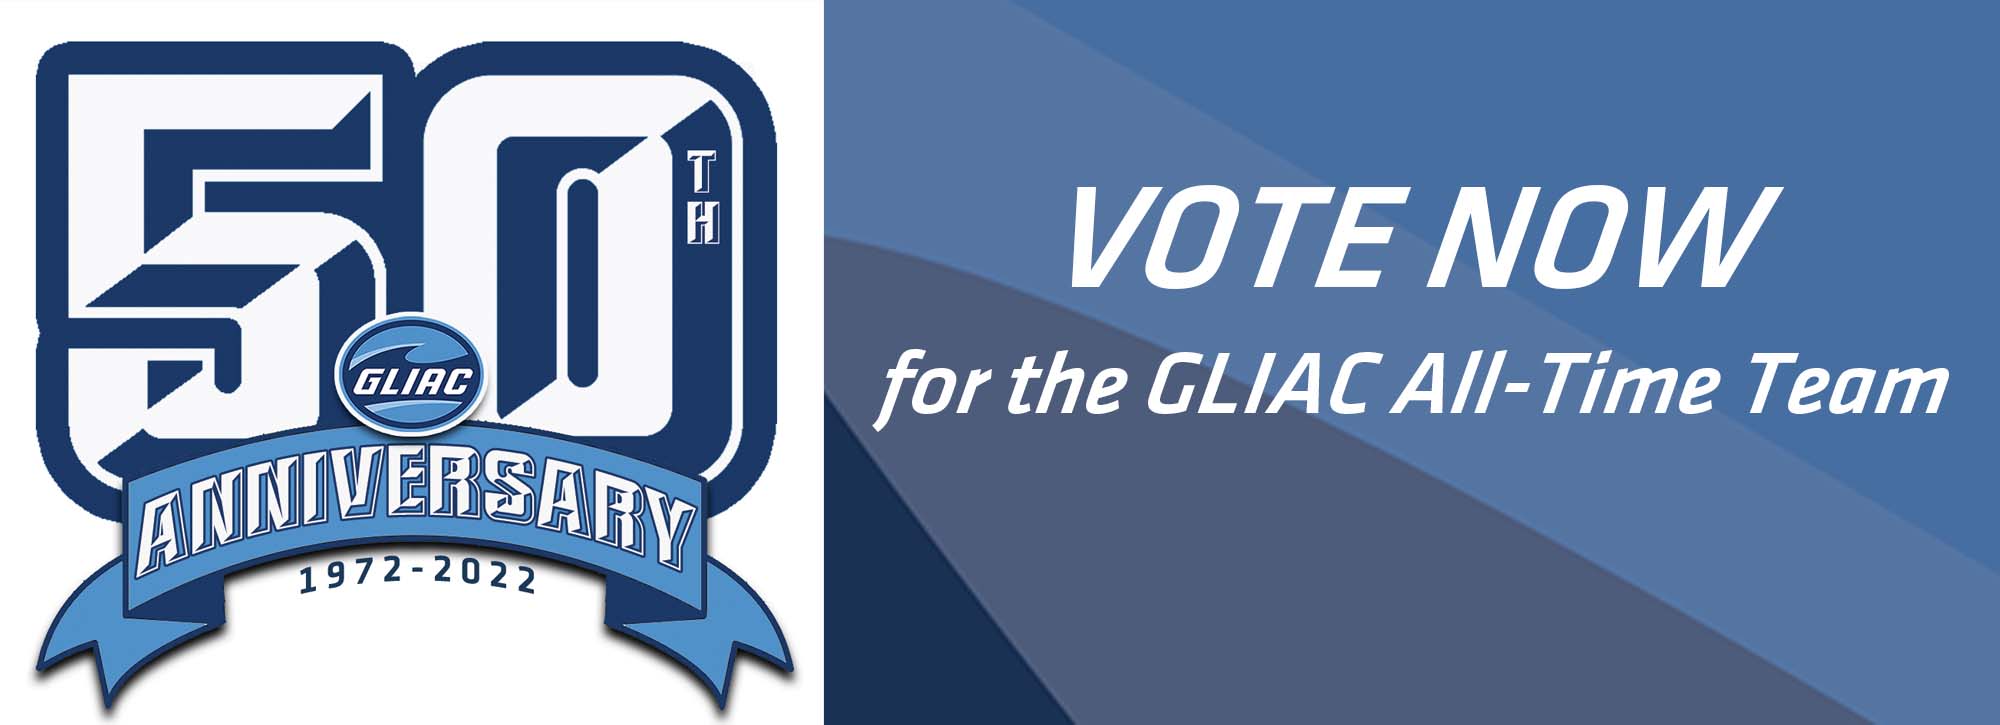 Voting is open for the GLIAC 50th Anniversary All-Time Teams list